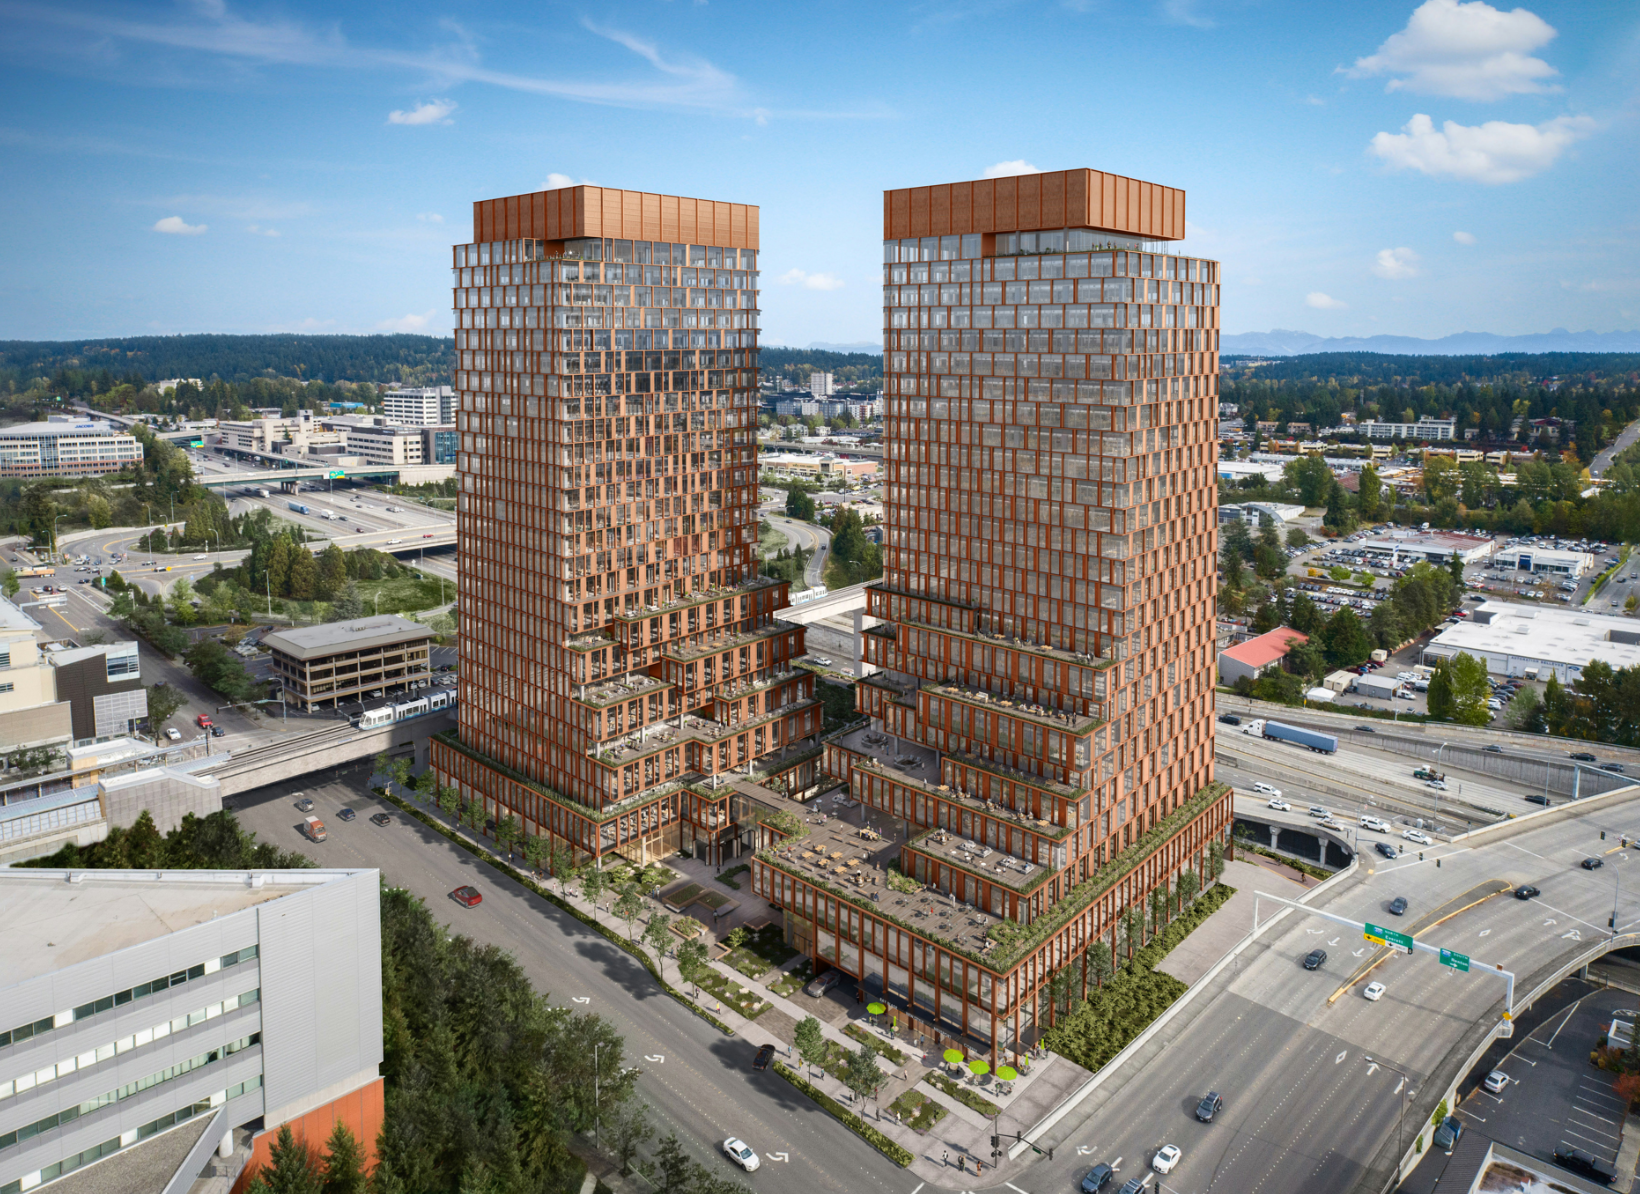 1.2M Sq Ft Two-Tower Office Project in Bellevue Gets Updated Name, Rendering